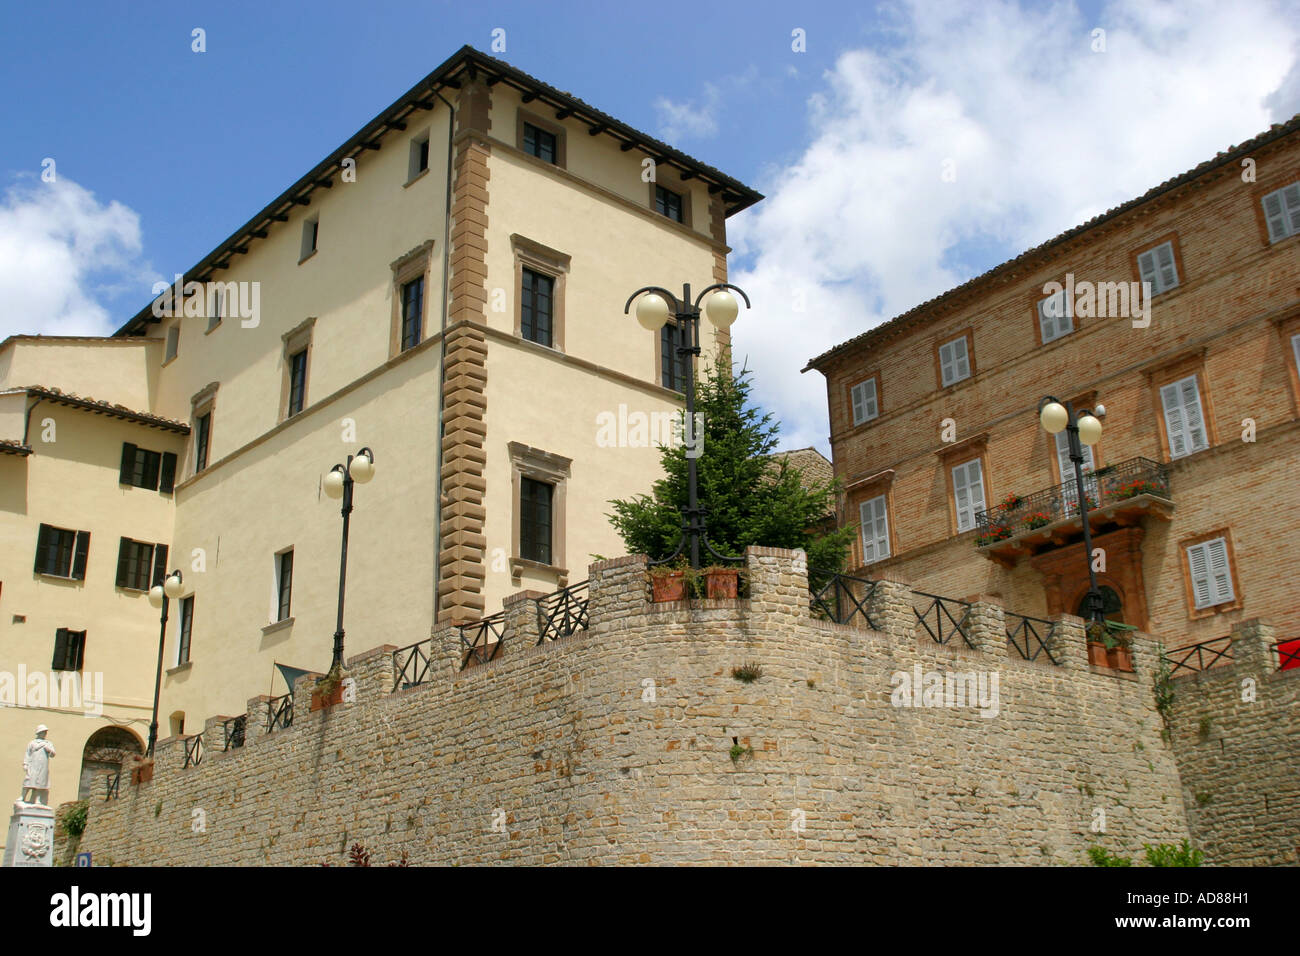 Imposing restored 15th century Palazzo in the main piazza of the charming hilltop town of Monte san Martino in Le Marche Italy Stock Photo